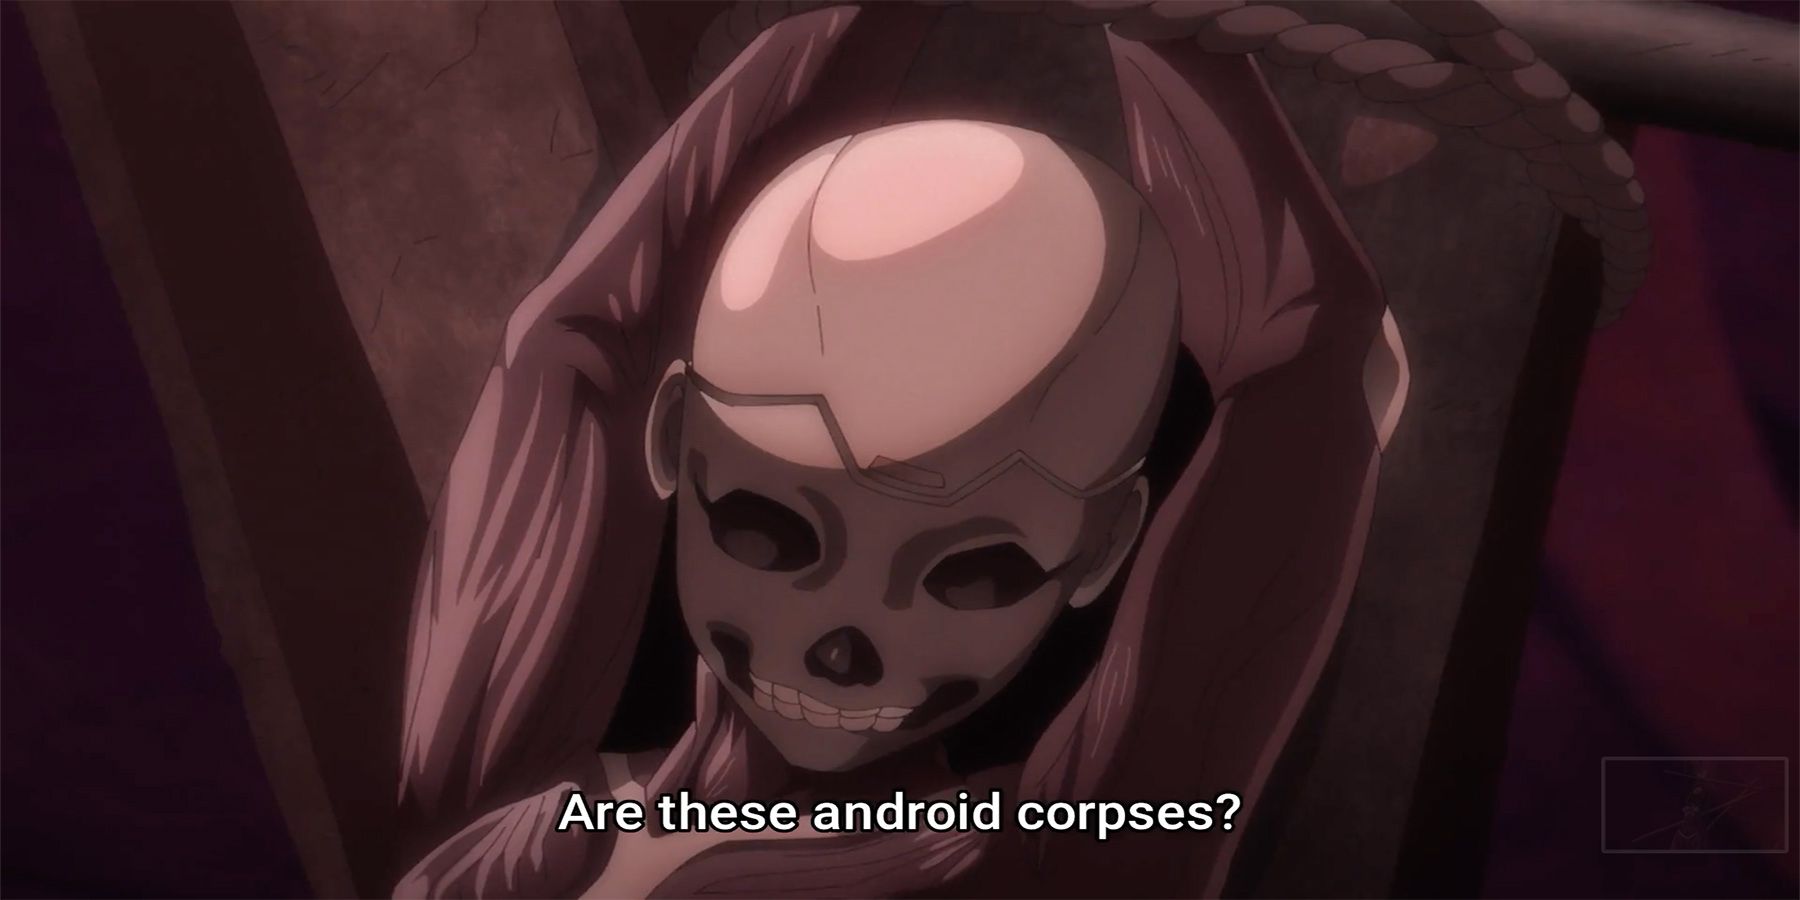 Android Corpse